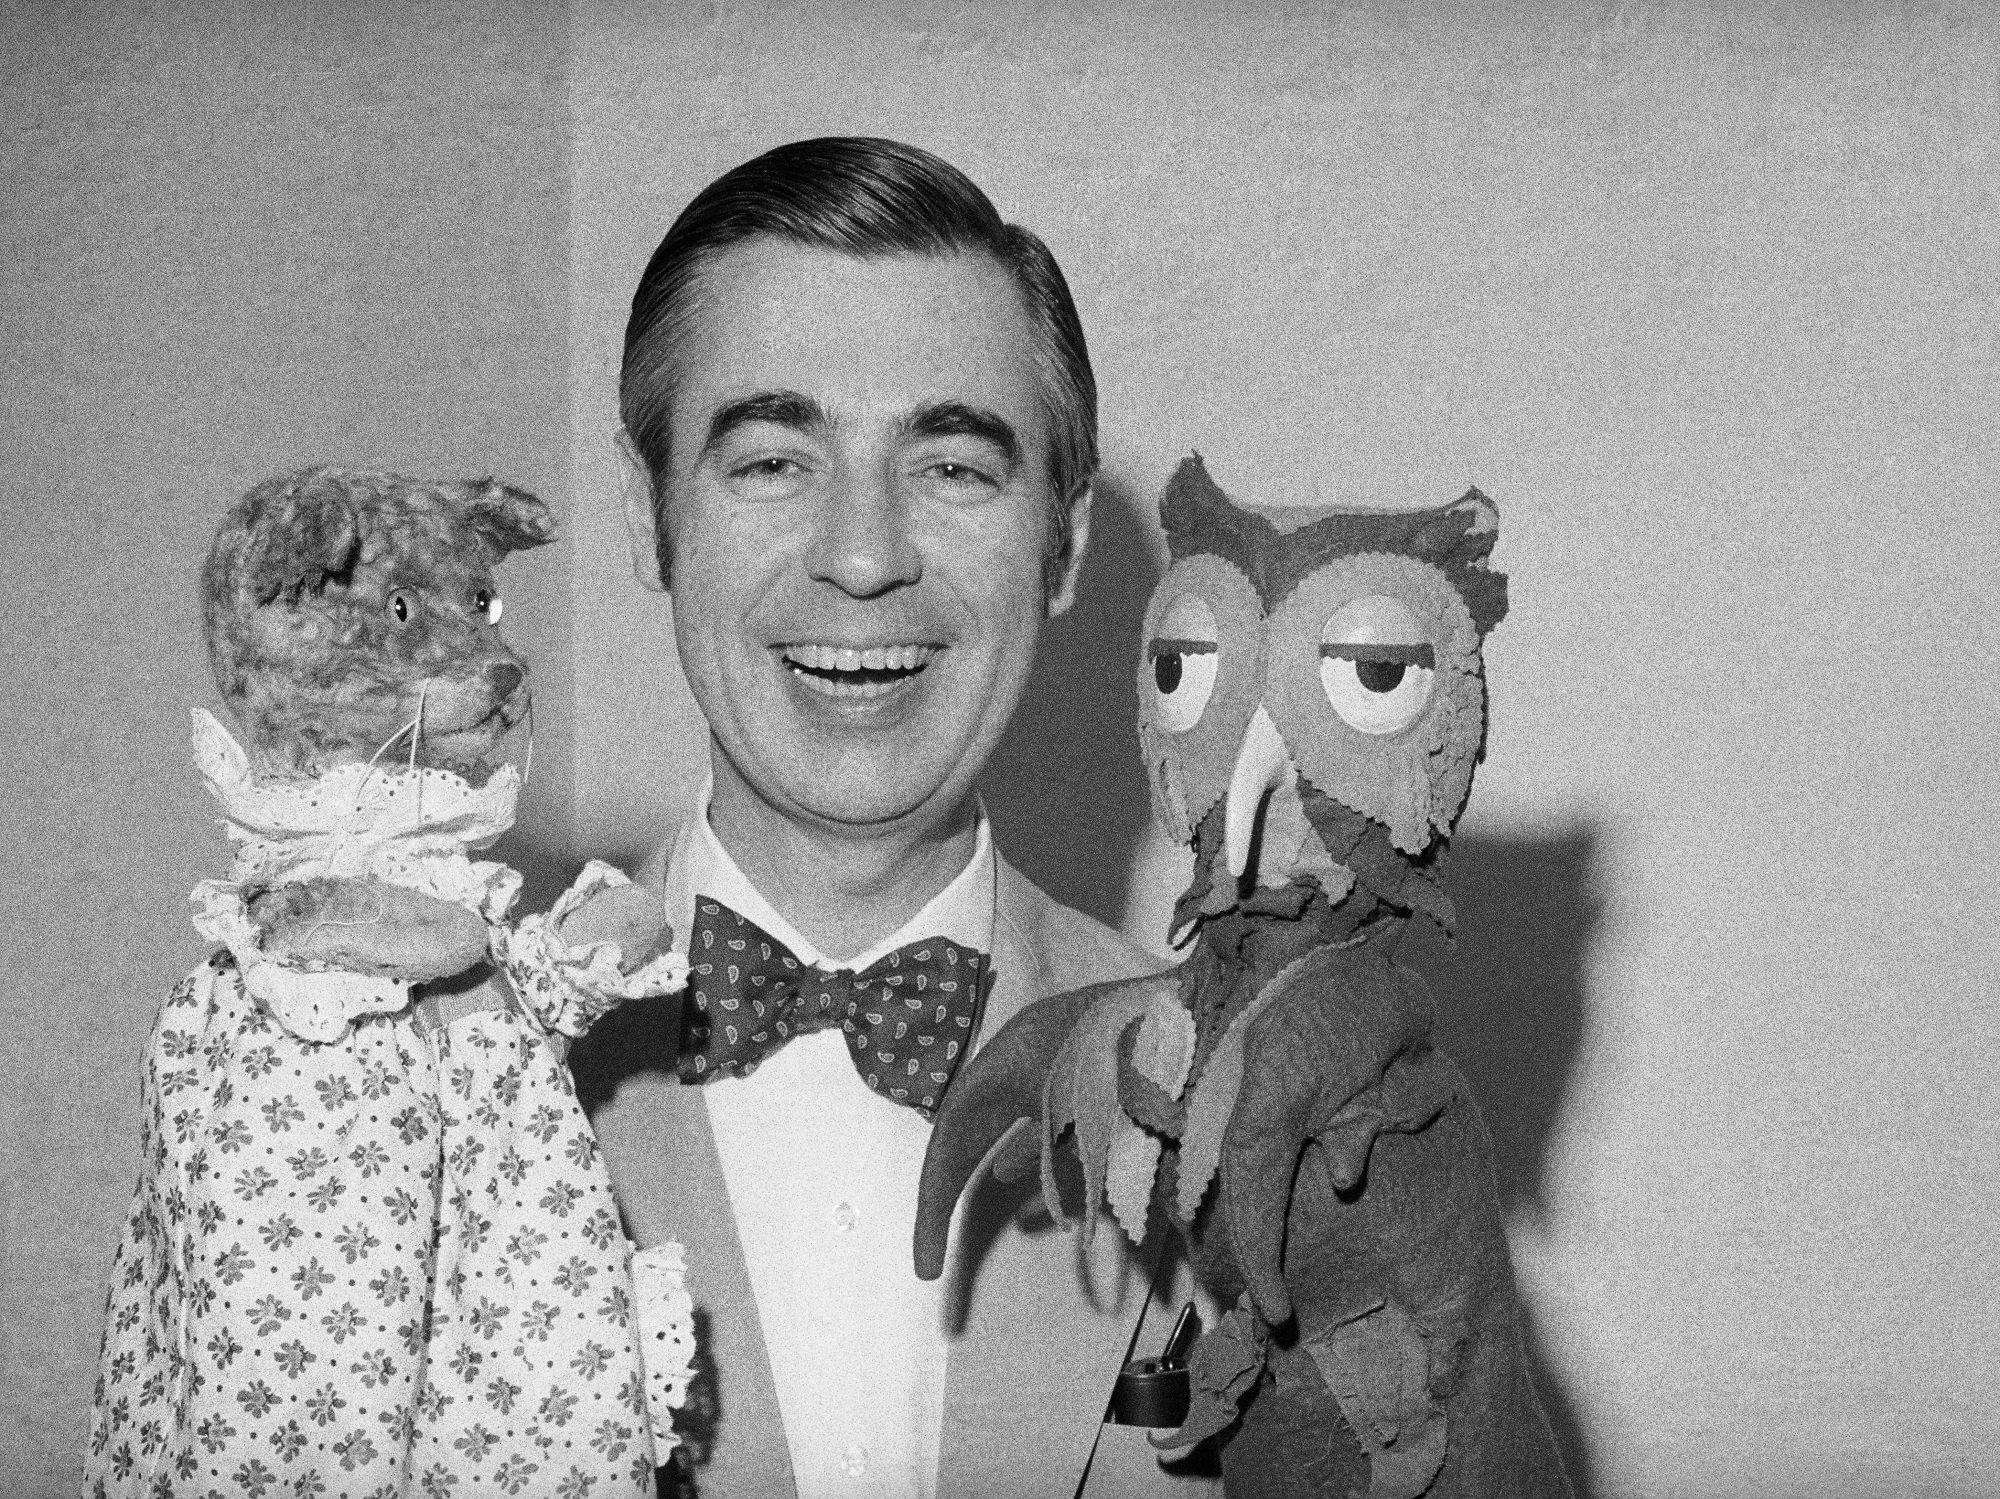 Mr. Rogers with two puppets